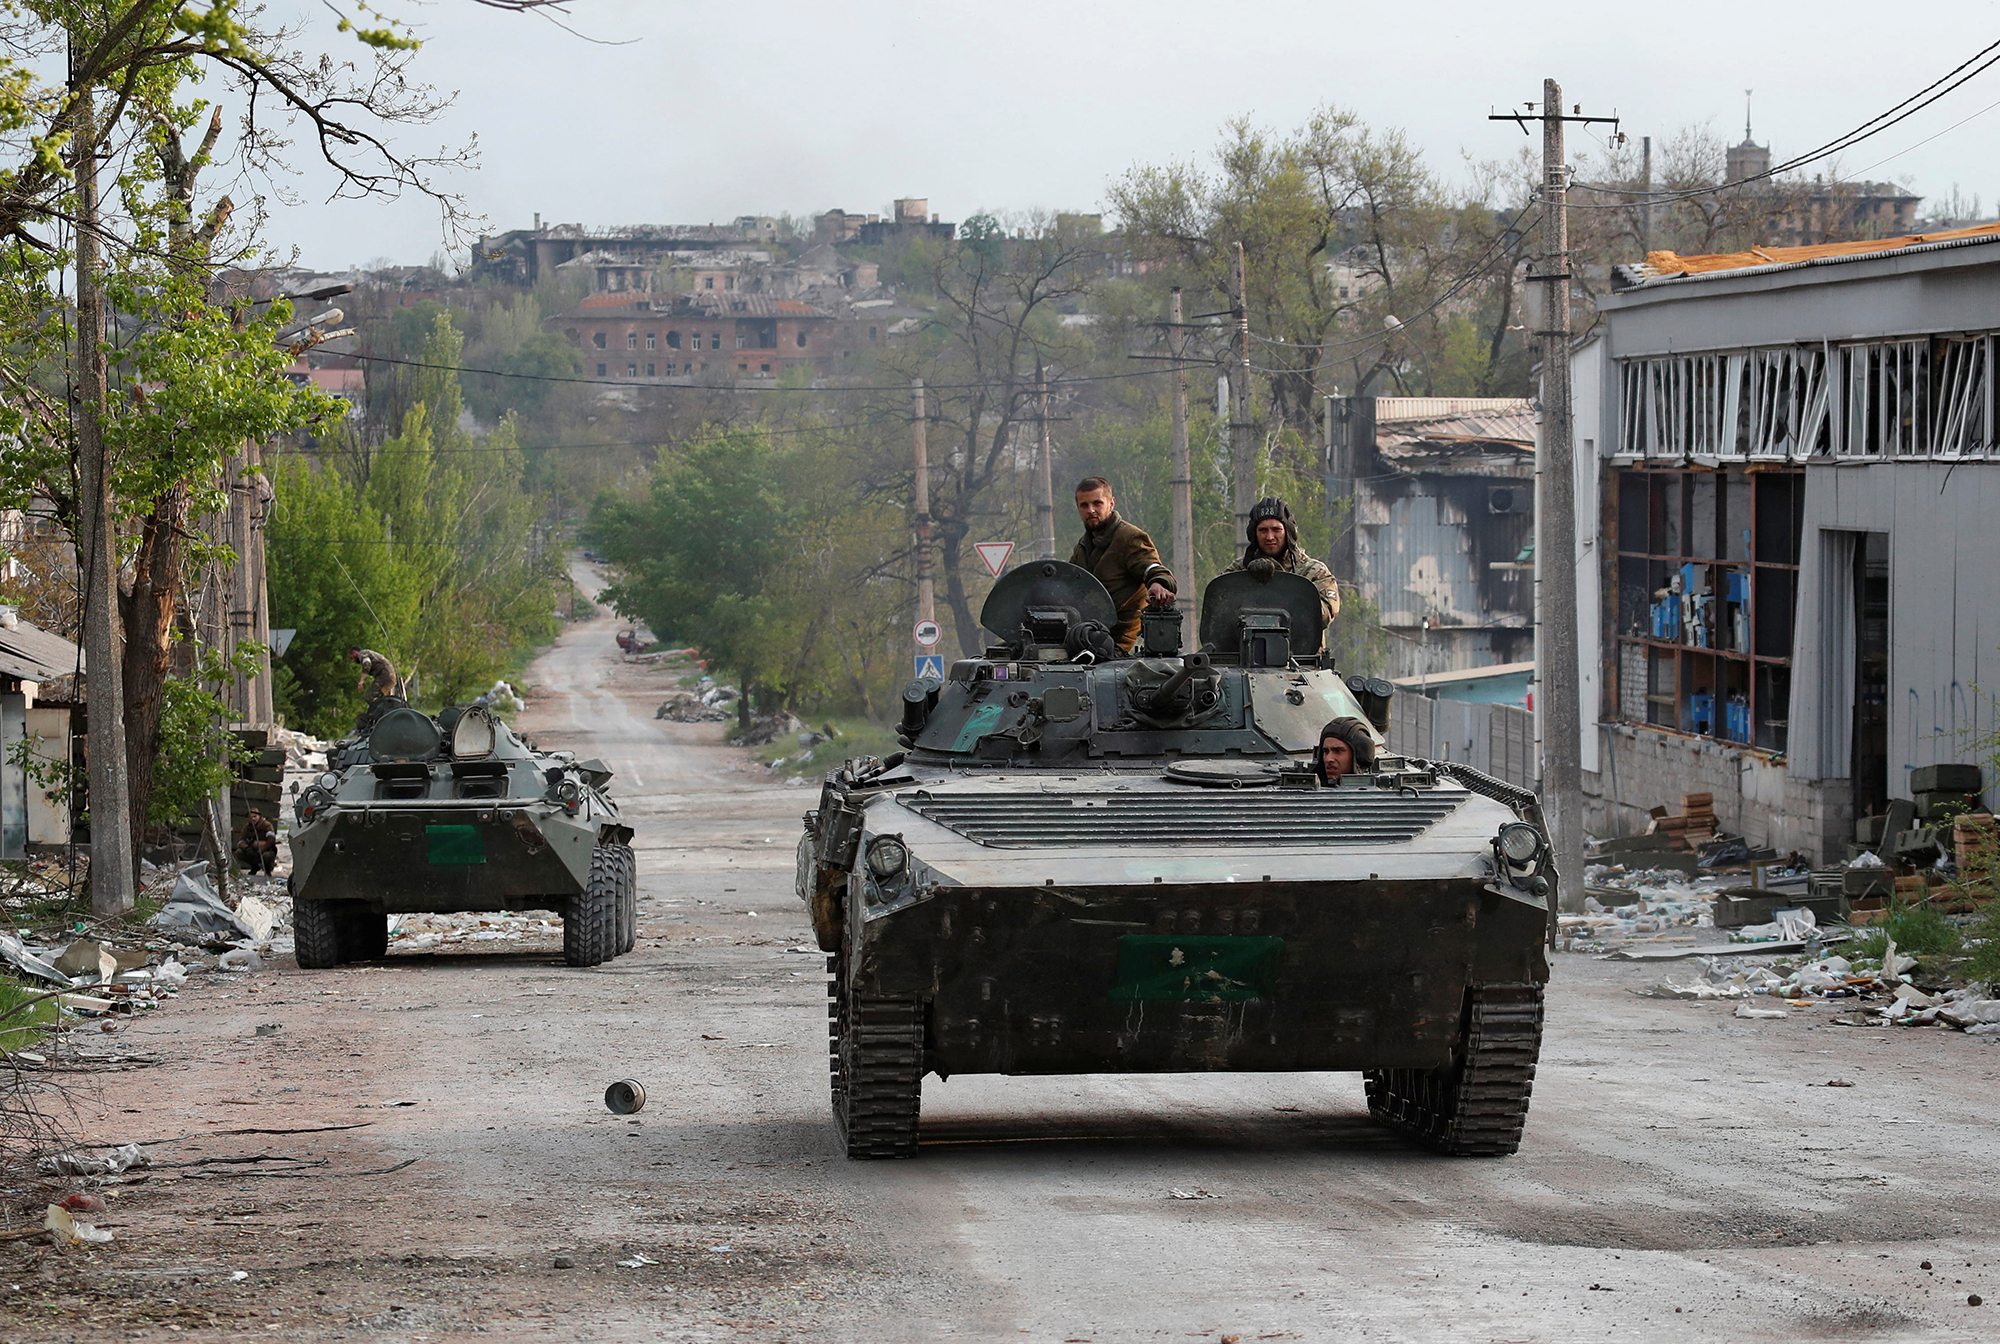 Service members of pro-Russian troops ride an infantry combat vehicle near the Azovstal steel plant in the southern port city of Mariupol, Ukraine, on May 5.